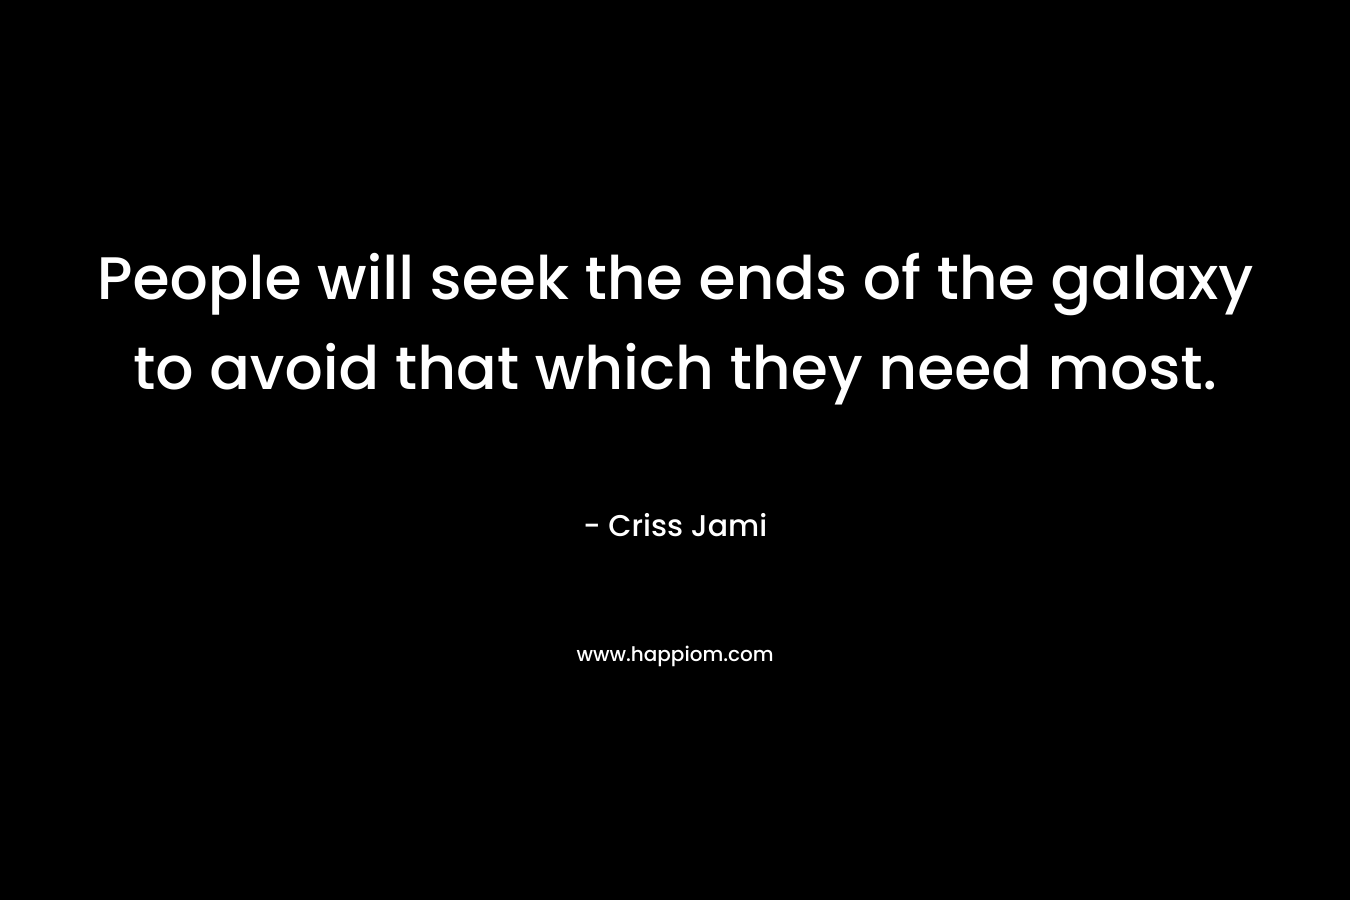 People will seek the ends of the galaxy to avoid that which they need most. – Criss Jami